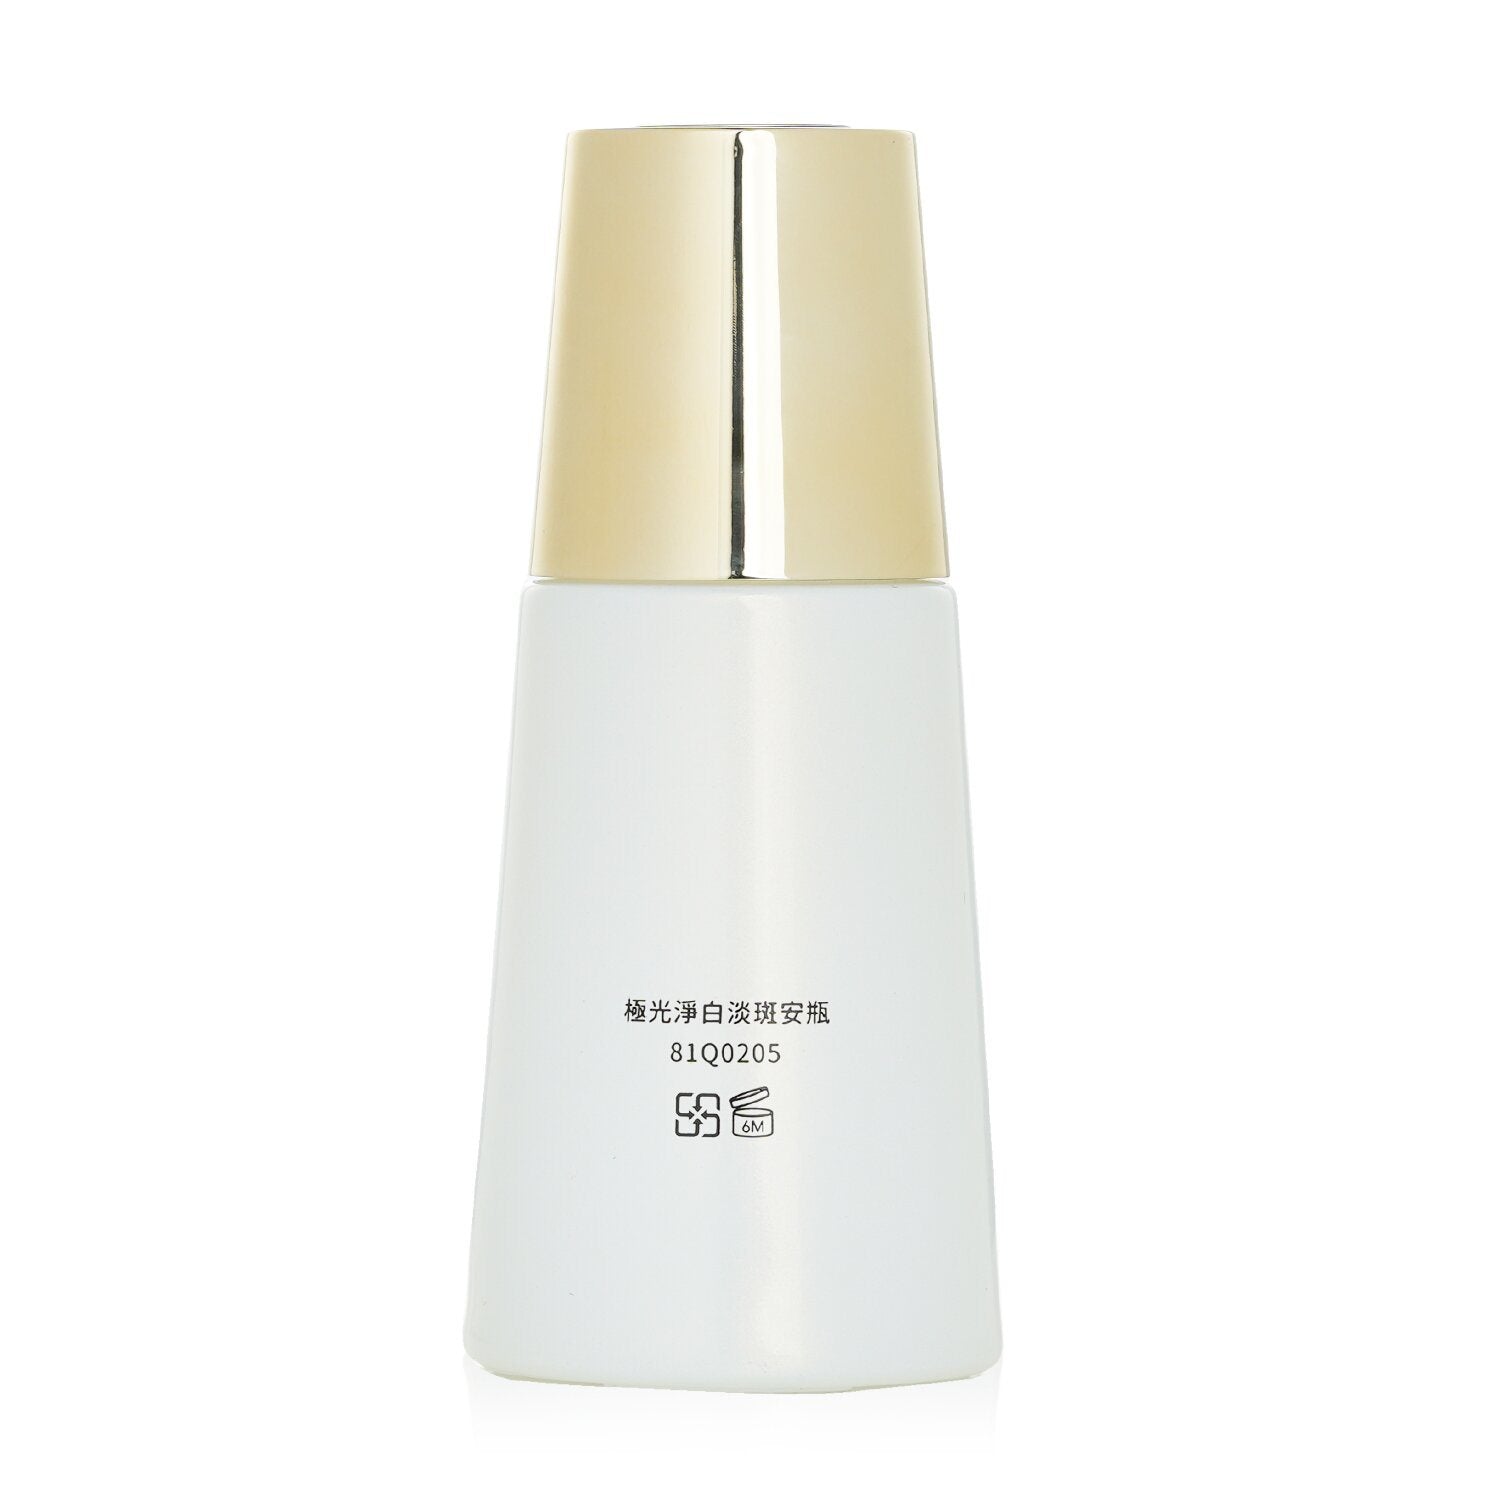 NATURAL BEAUTY - BIO UP a-GG Ascorbyl Glucoside Concentrated Brightening Essence 81Q0205/128317 30ml/1.01oz - lolaluxeshop